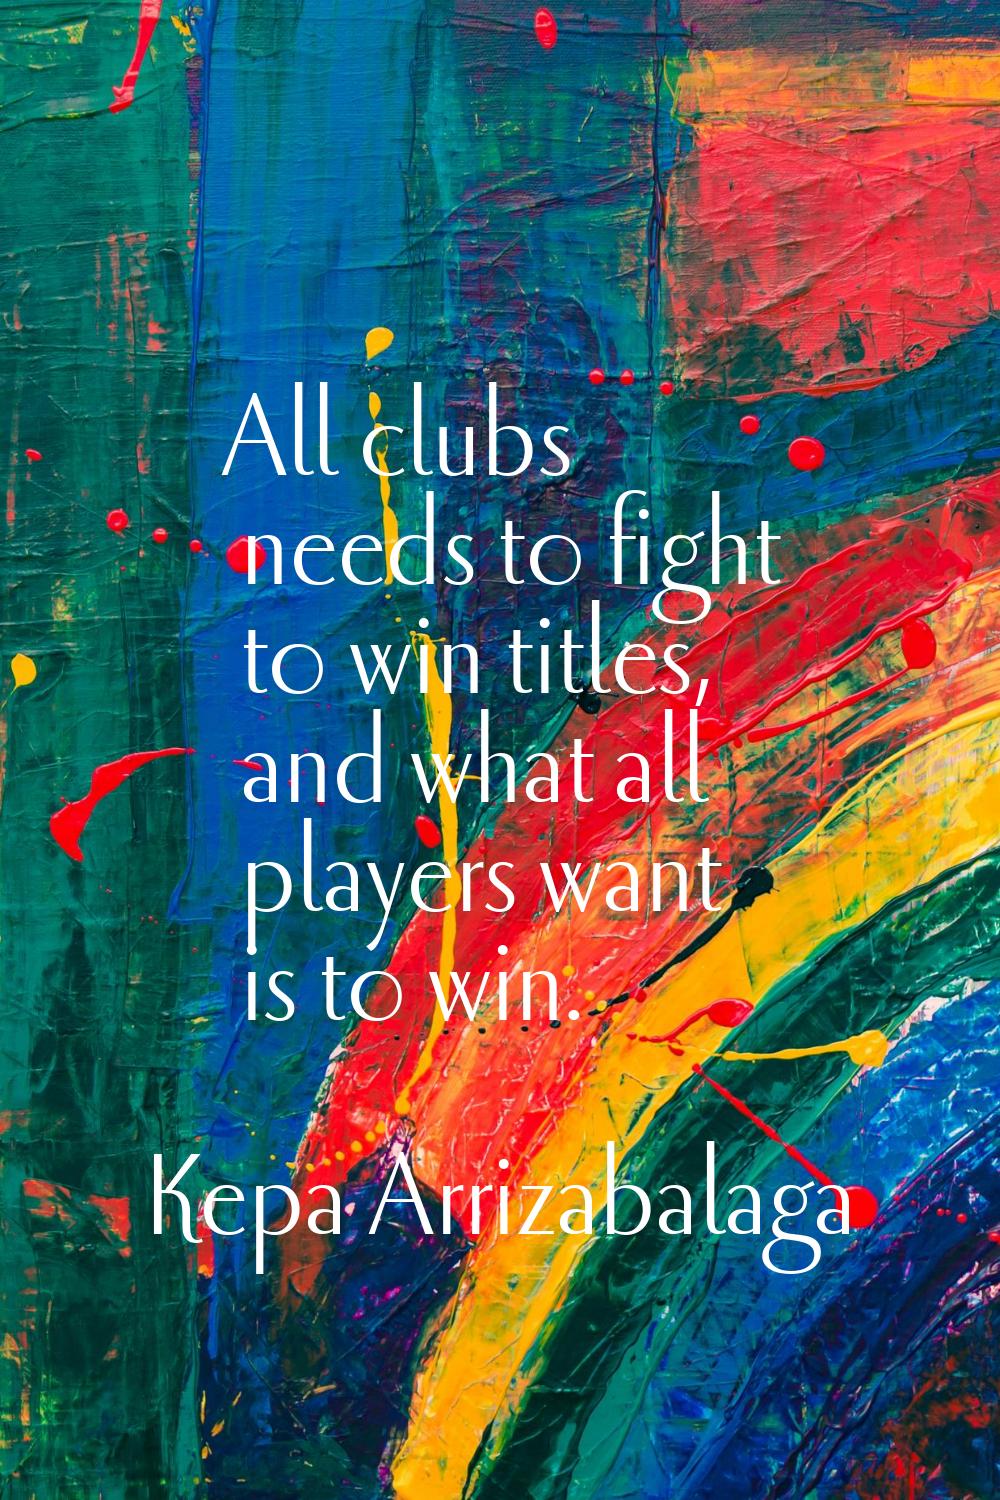 All clubs needs to fight to win titles, and what all players want is to win.